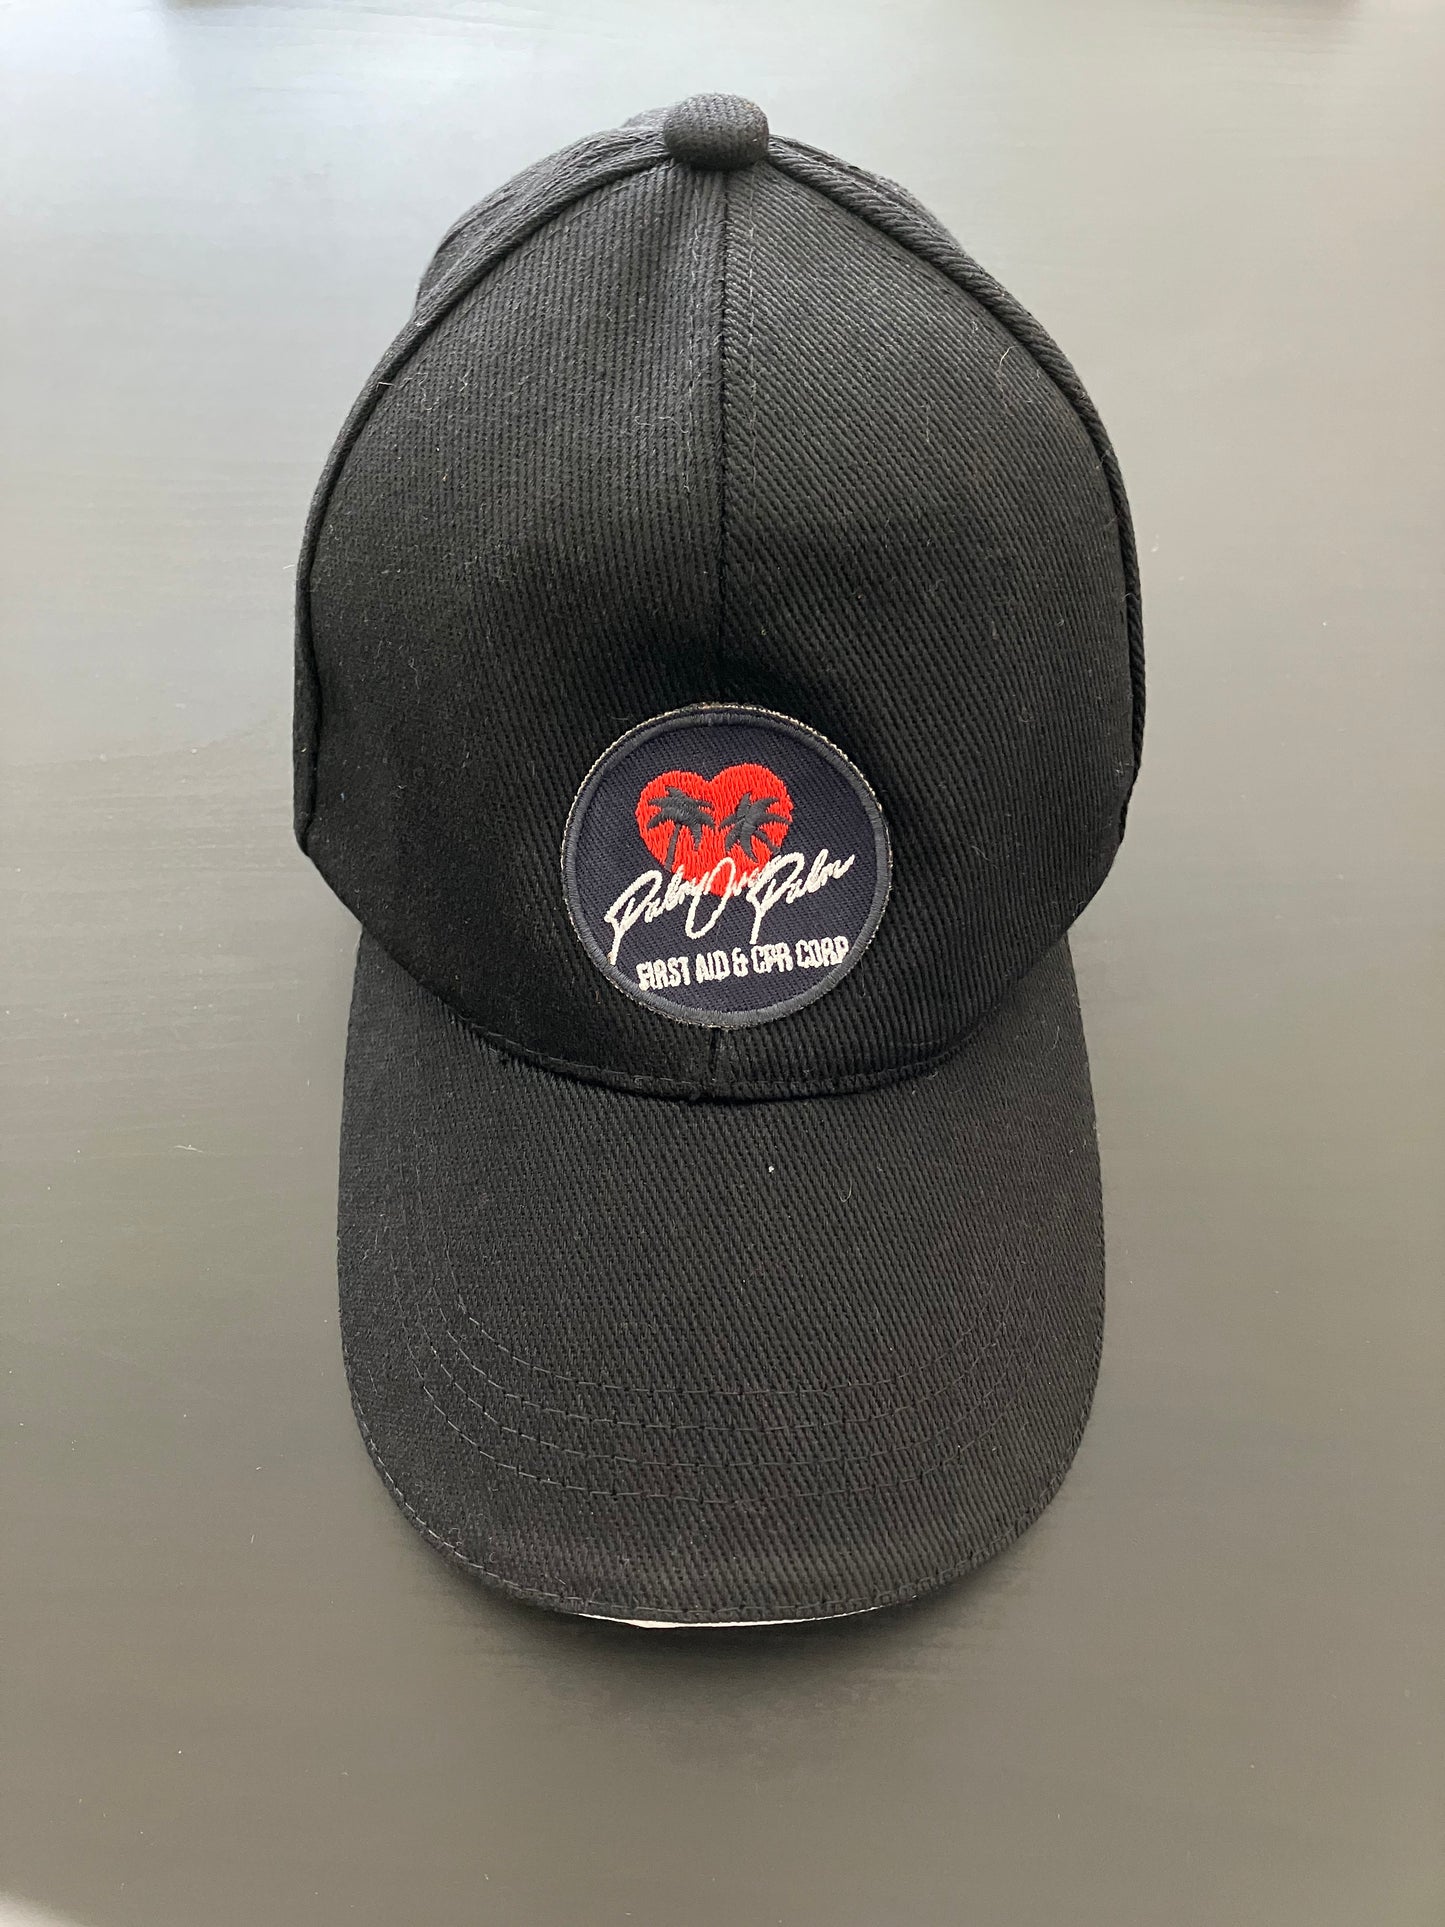 Palm Over Palm First Aid & CPR Corp. Signature Baseball Cap For Men and Women